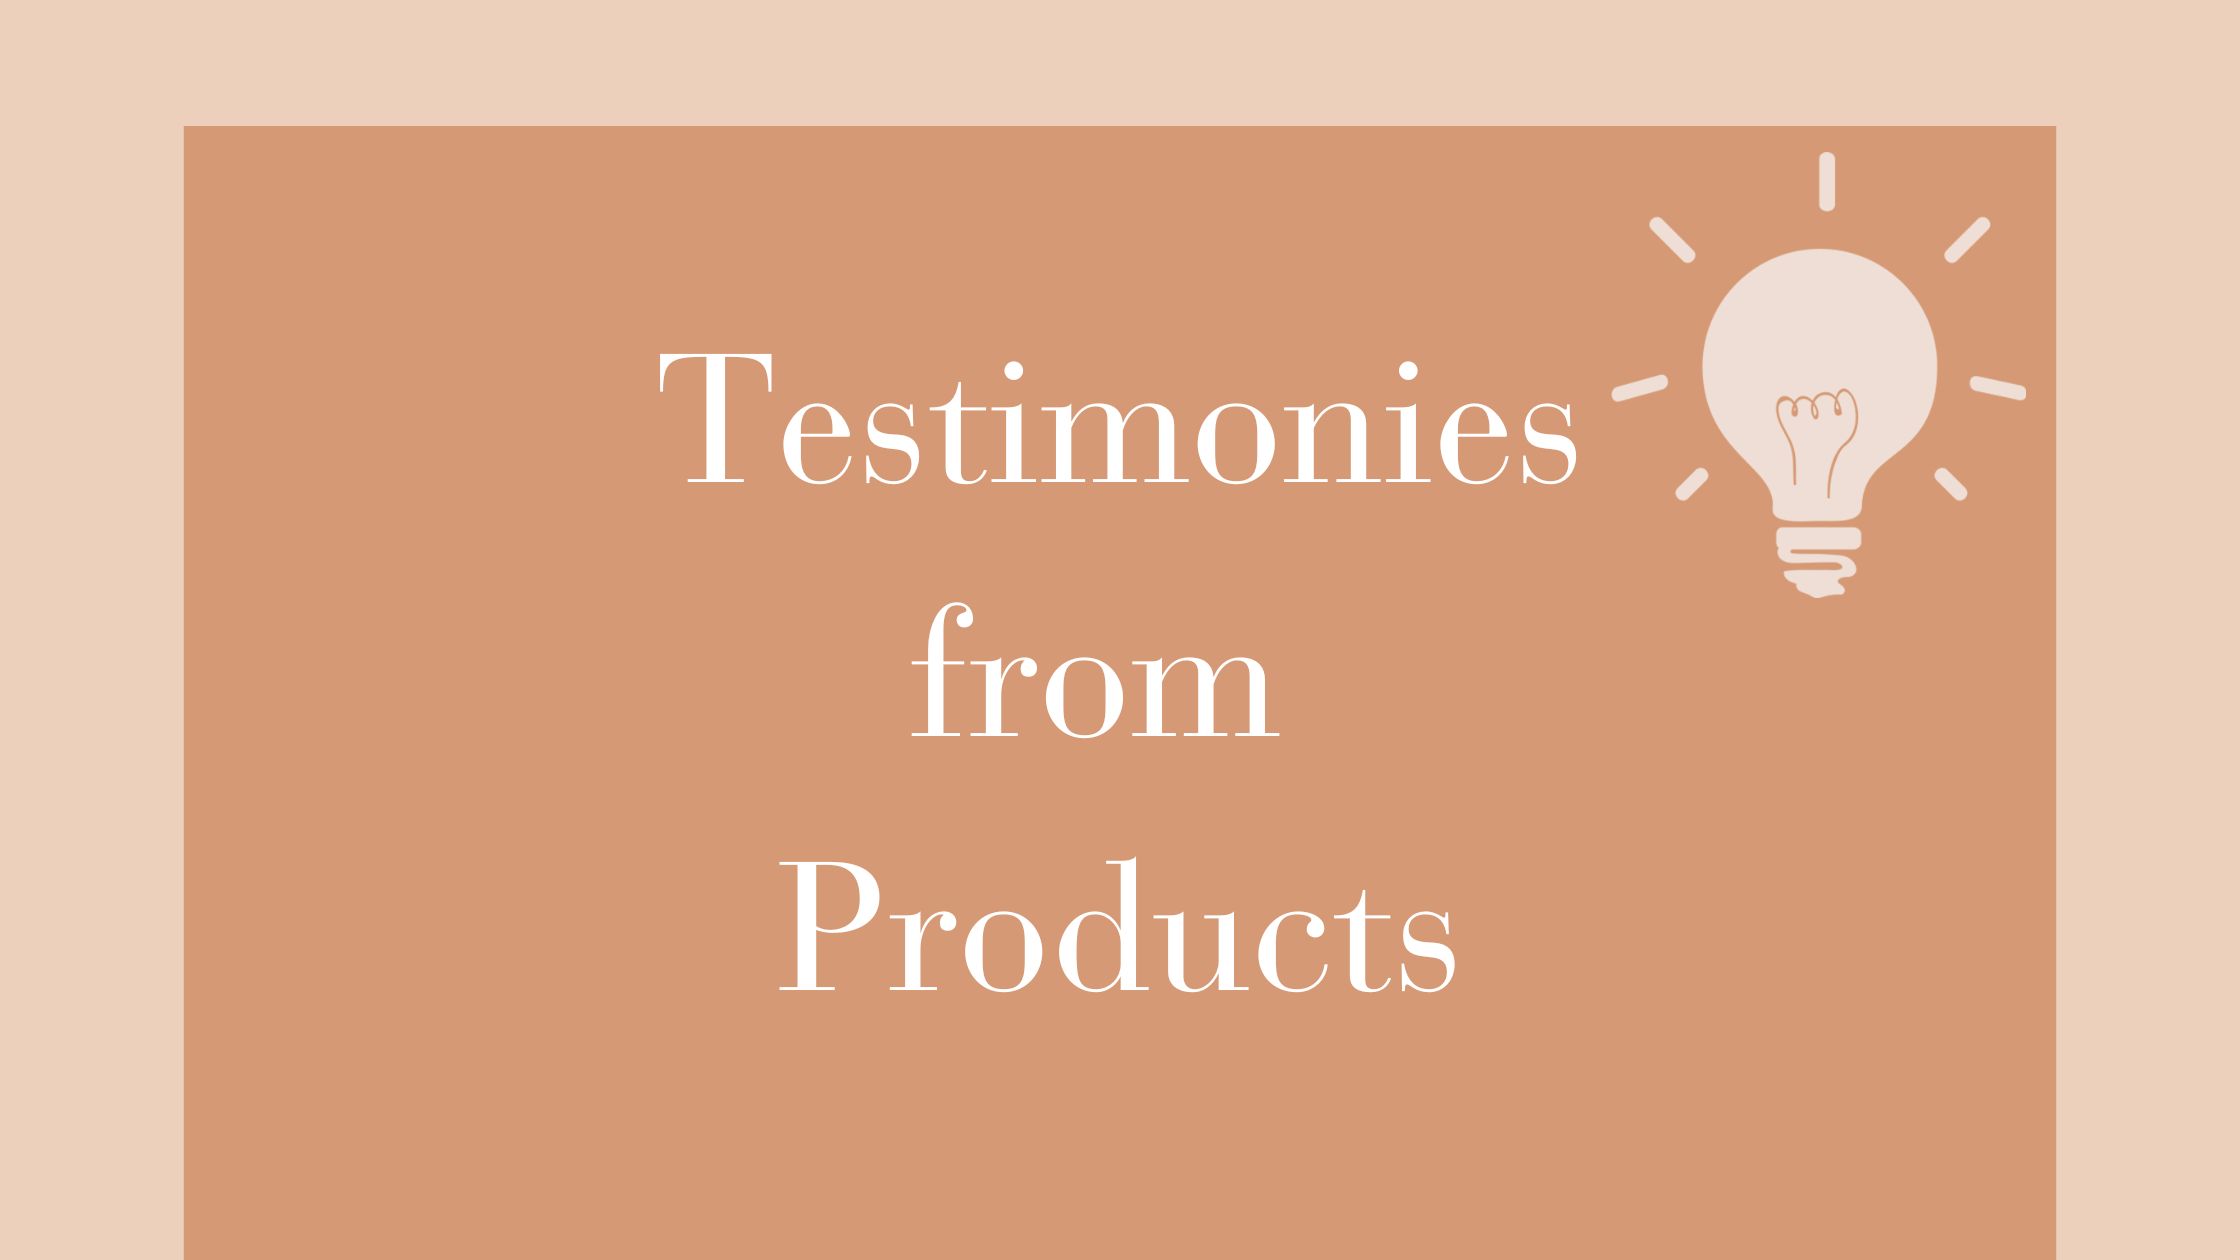 Testimonies from Products